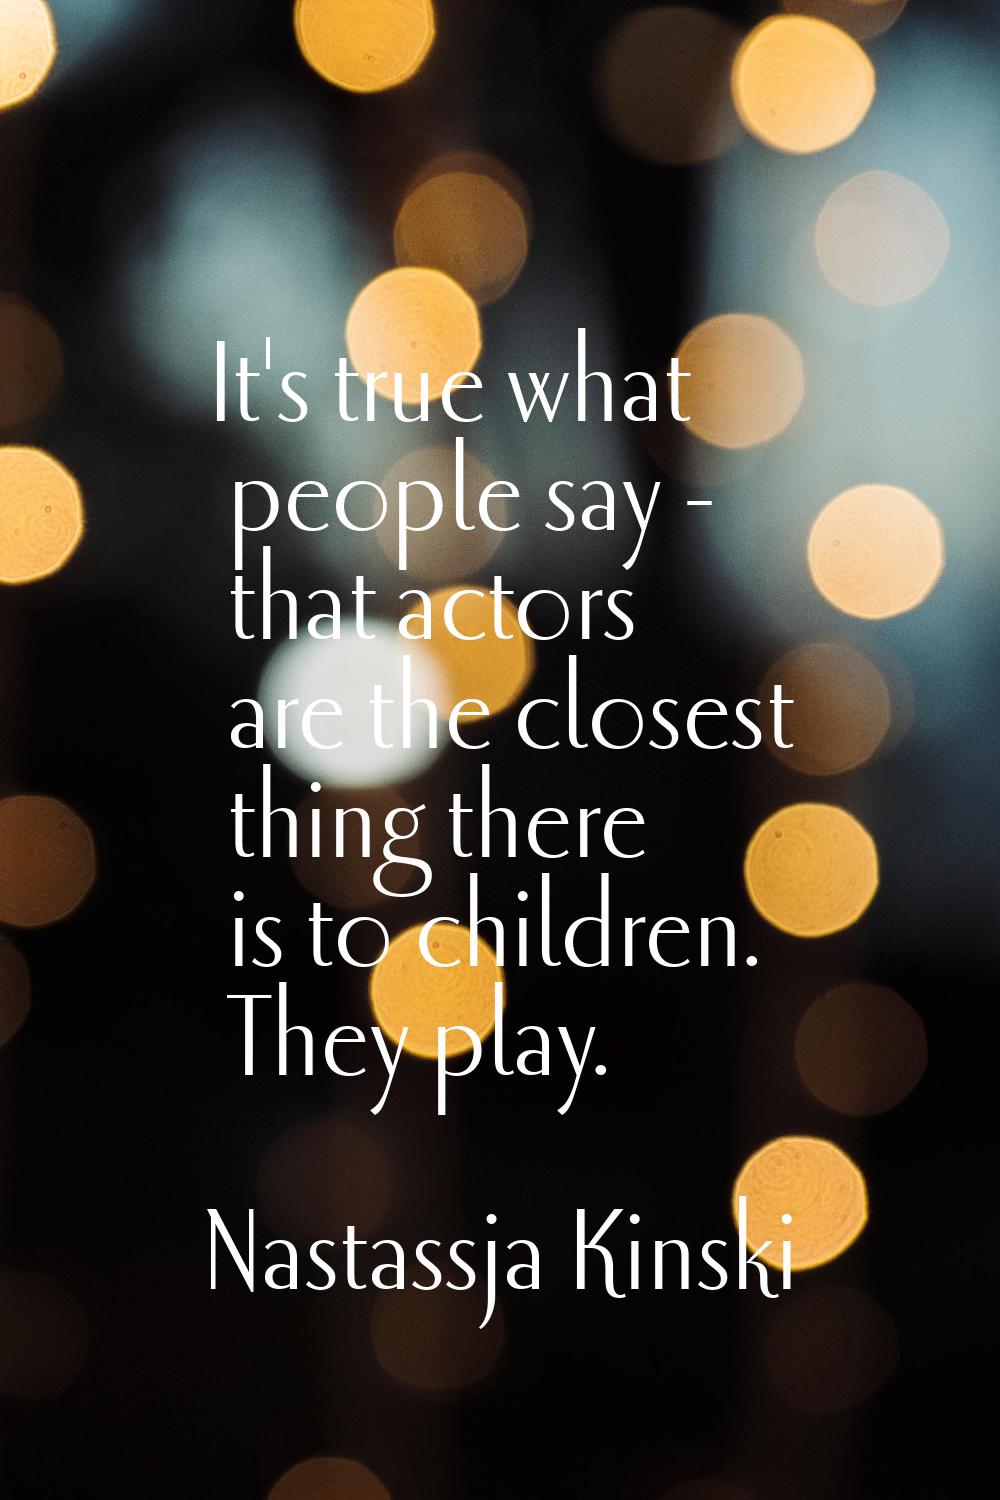 It's true what people say - that actors are the closest thing there is to children. They play.